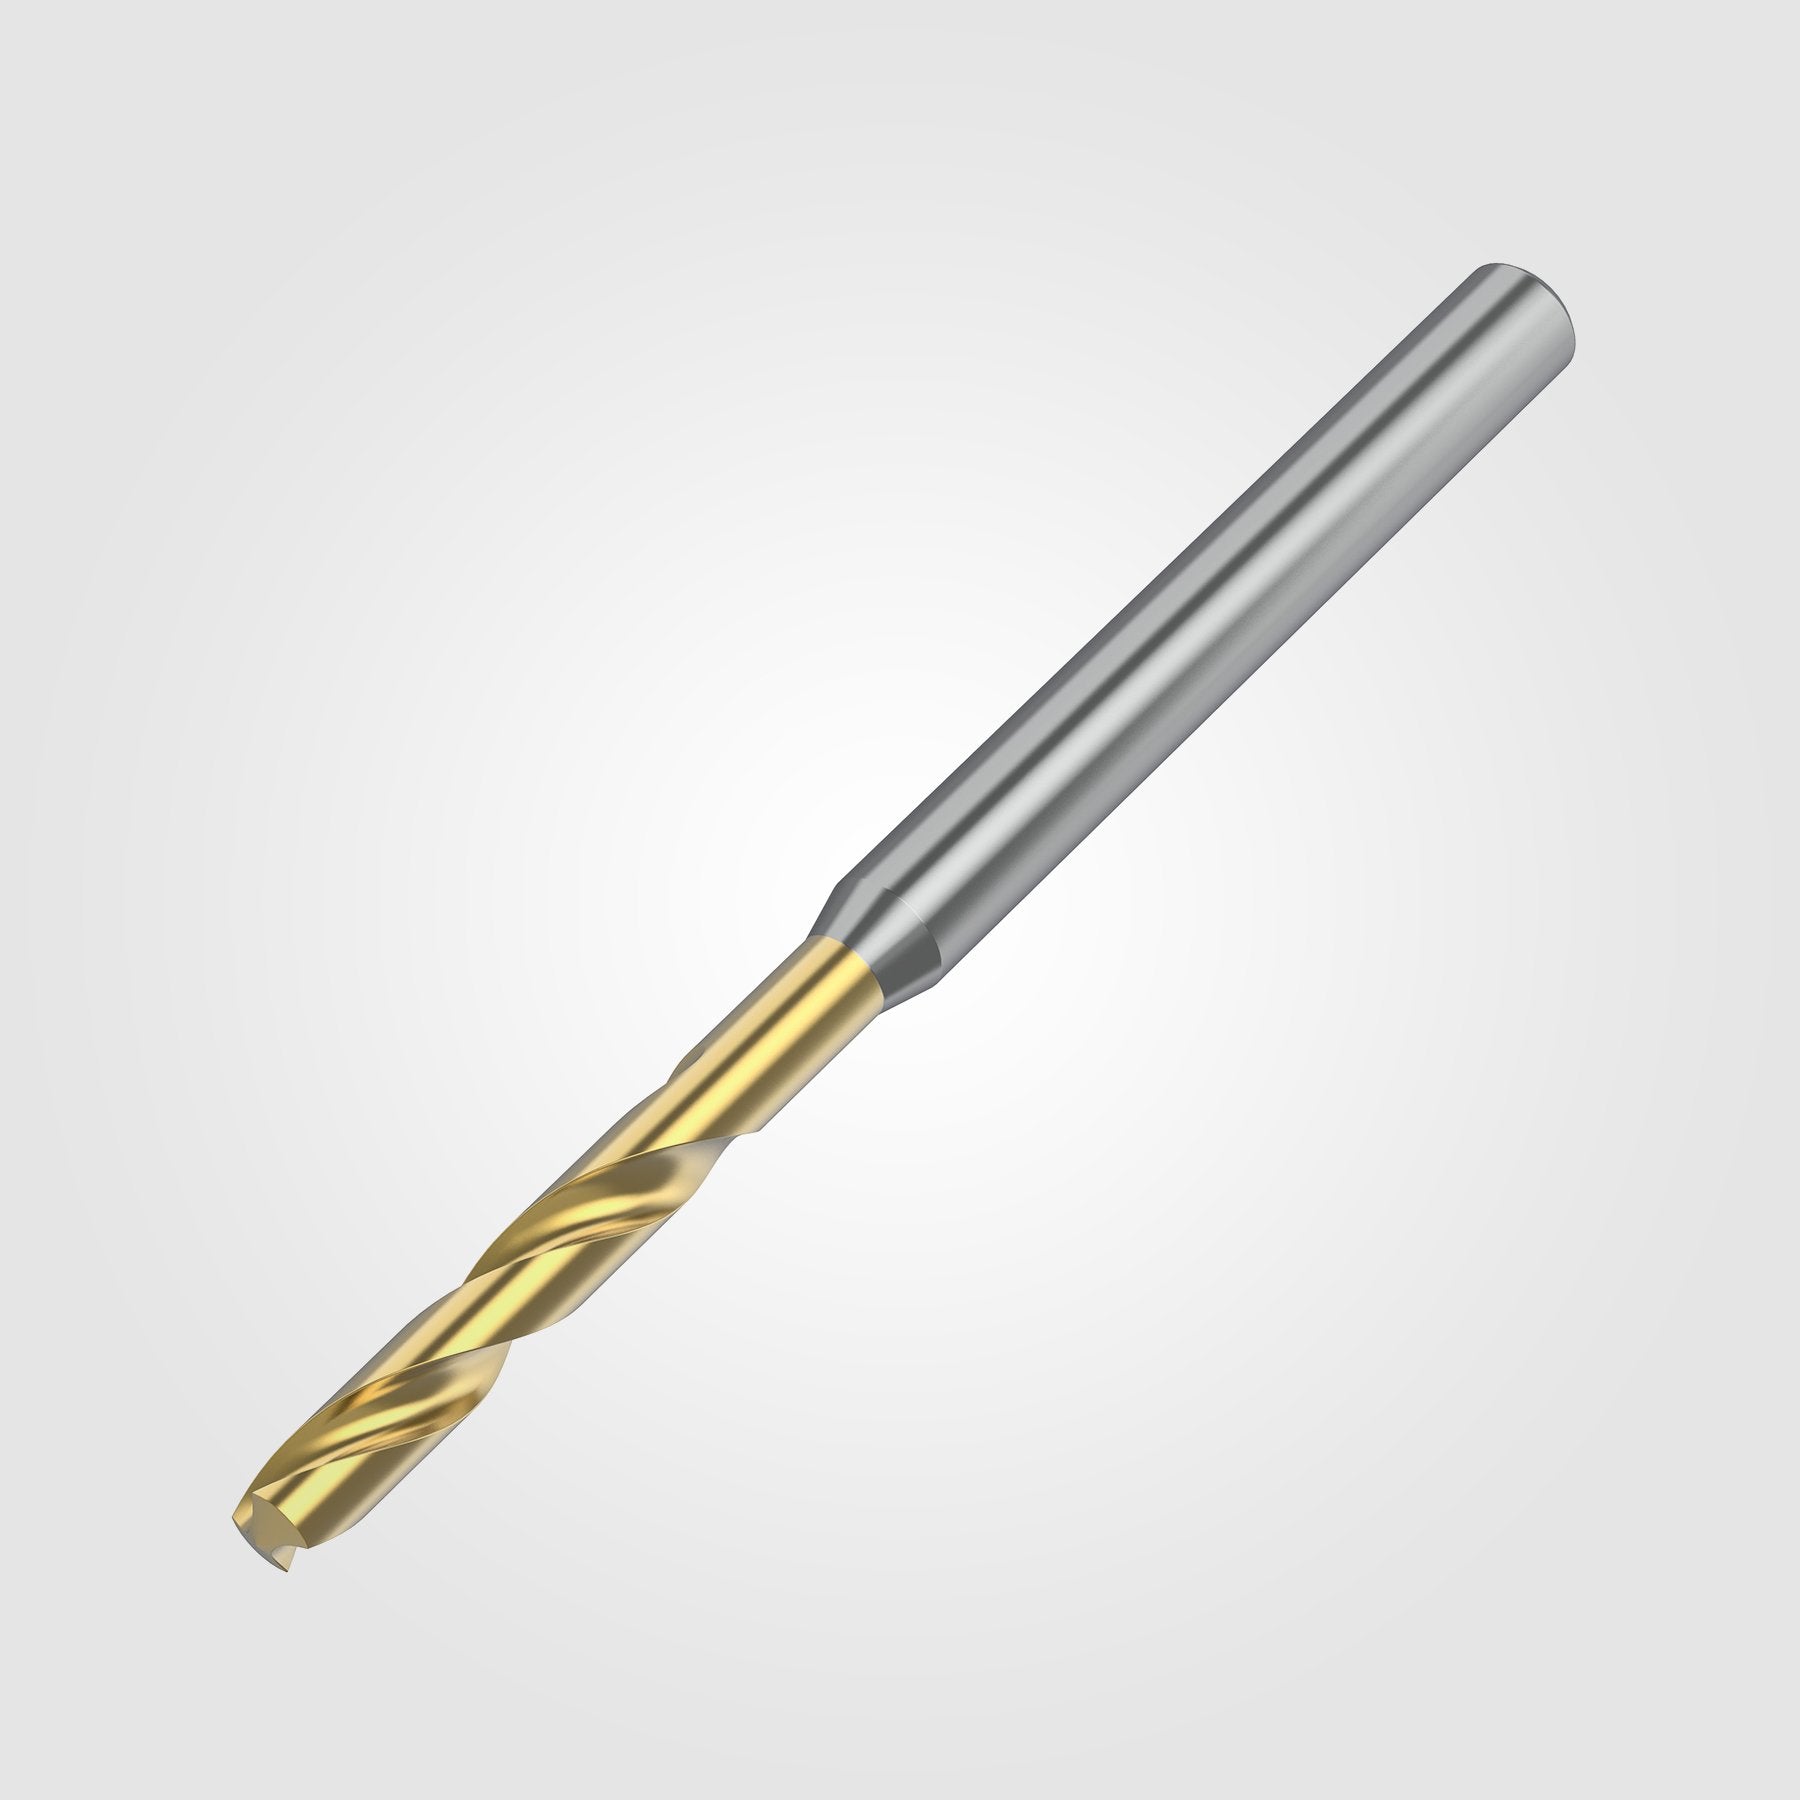 GOdrill (THROUGH COOLANT) | 10mm / .3937" / 3xD | SOLID CARBIDE DRILL | 4151202